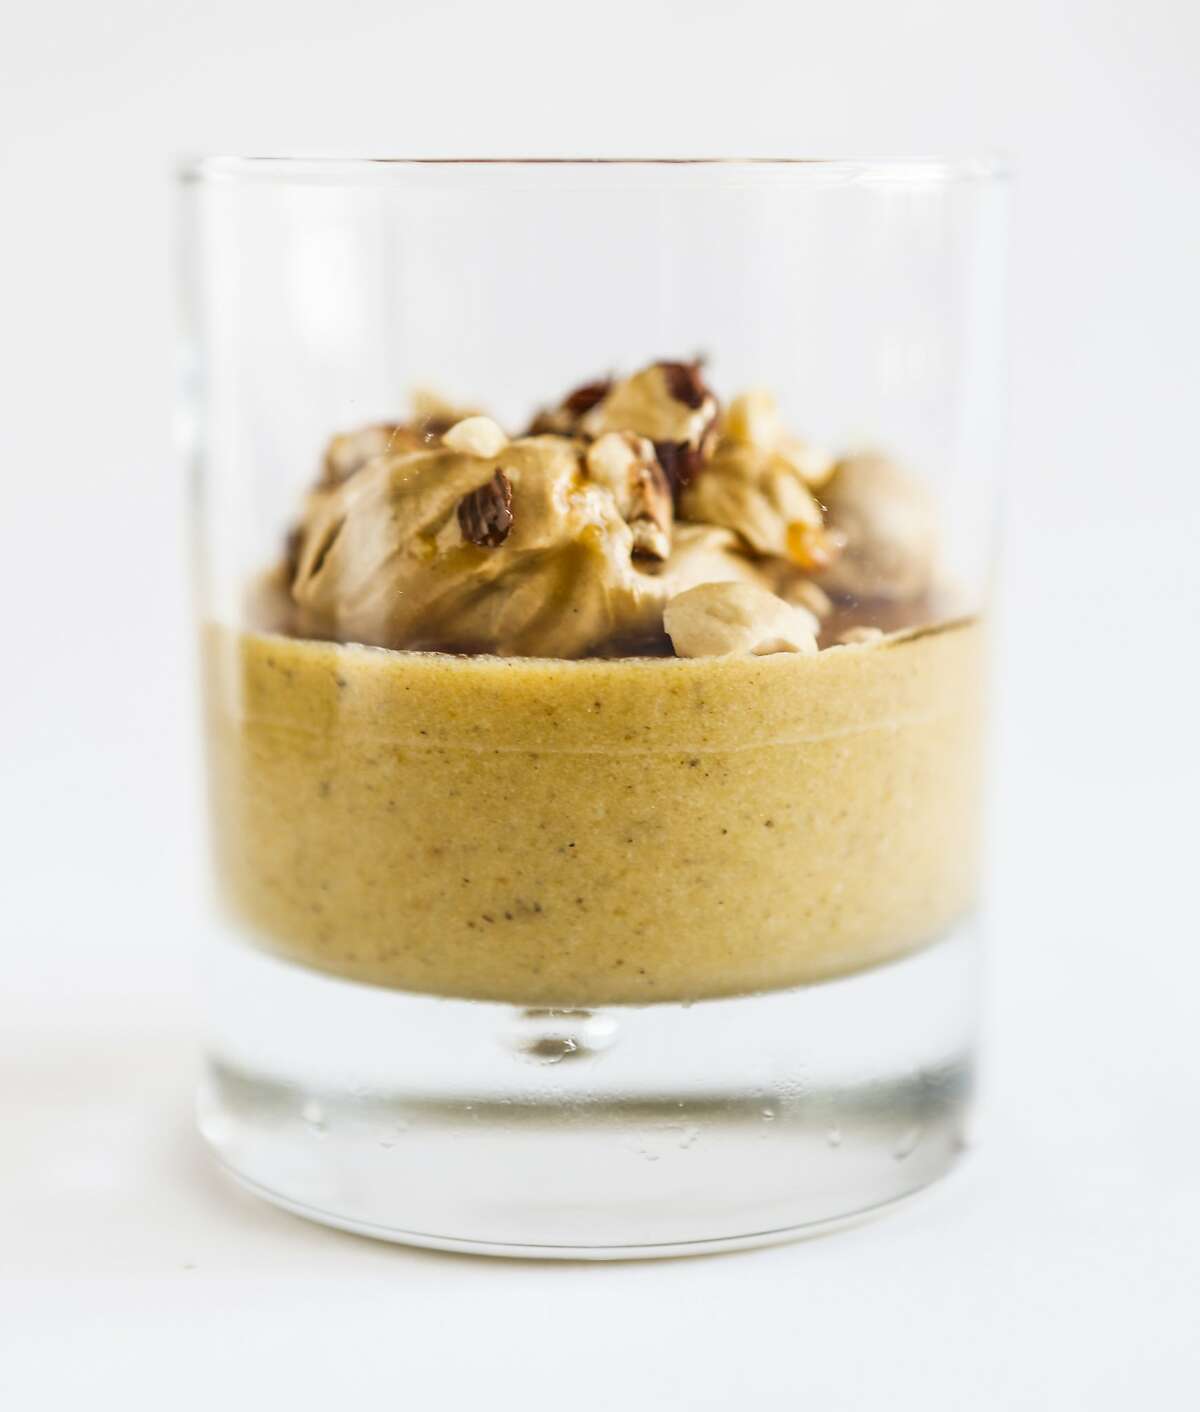 Pumpkin Parfait recipe by Mourad pastry chef Melissa Chou is seen on Wednesday, Oct. 14, 2015 in San Francisco, Calif.